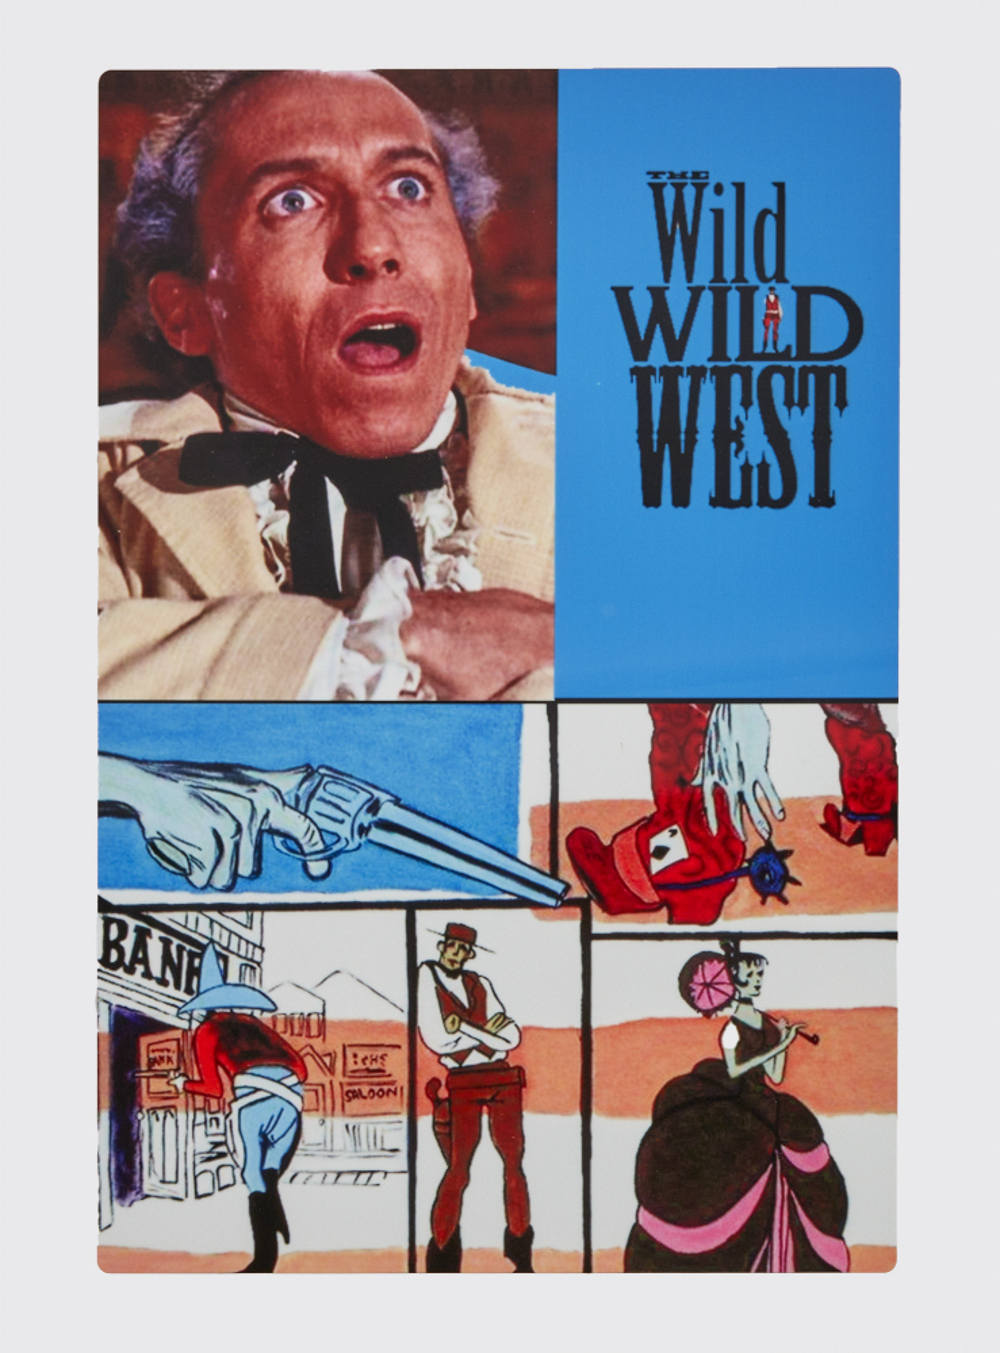 MICHAEL DUNN | "DR. LOVELESS" "THE WILD WILD WEST" LAB COAT (WITH DVD) - Image 5 of 9